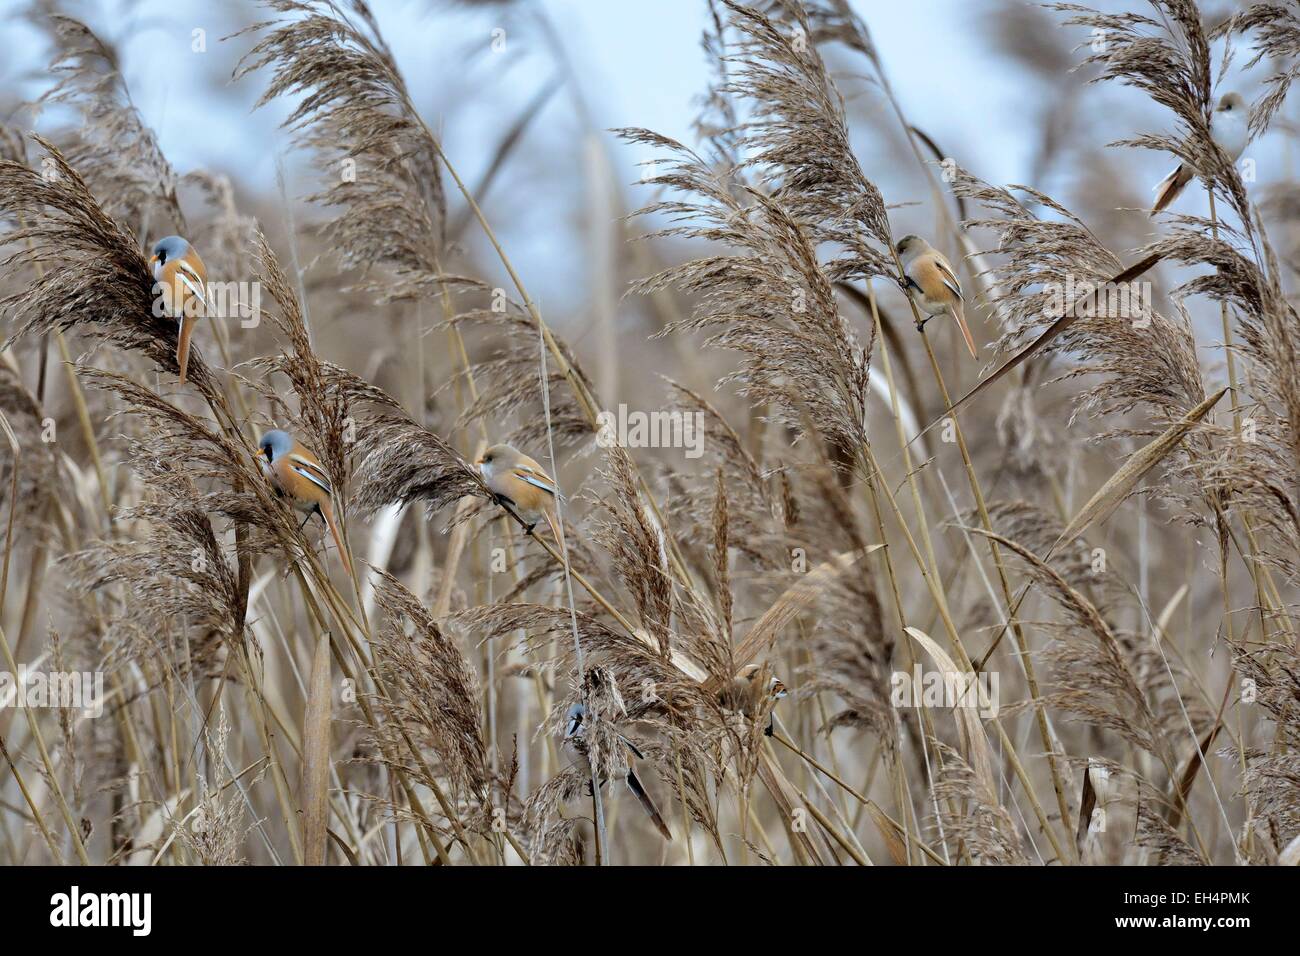 Switzerland, Canton of Neuchatel, mustache breading (Panurus biarmicus) dissecting the plume of a reed sedge meadow Stock Photo